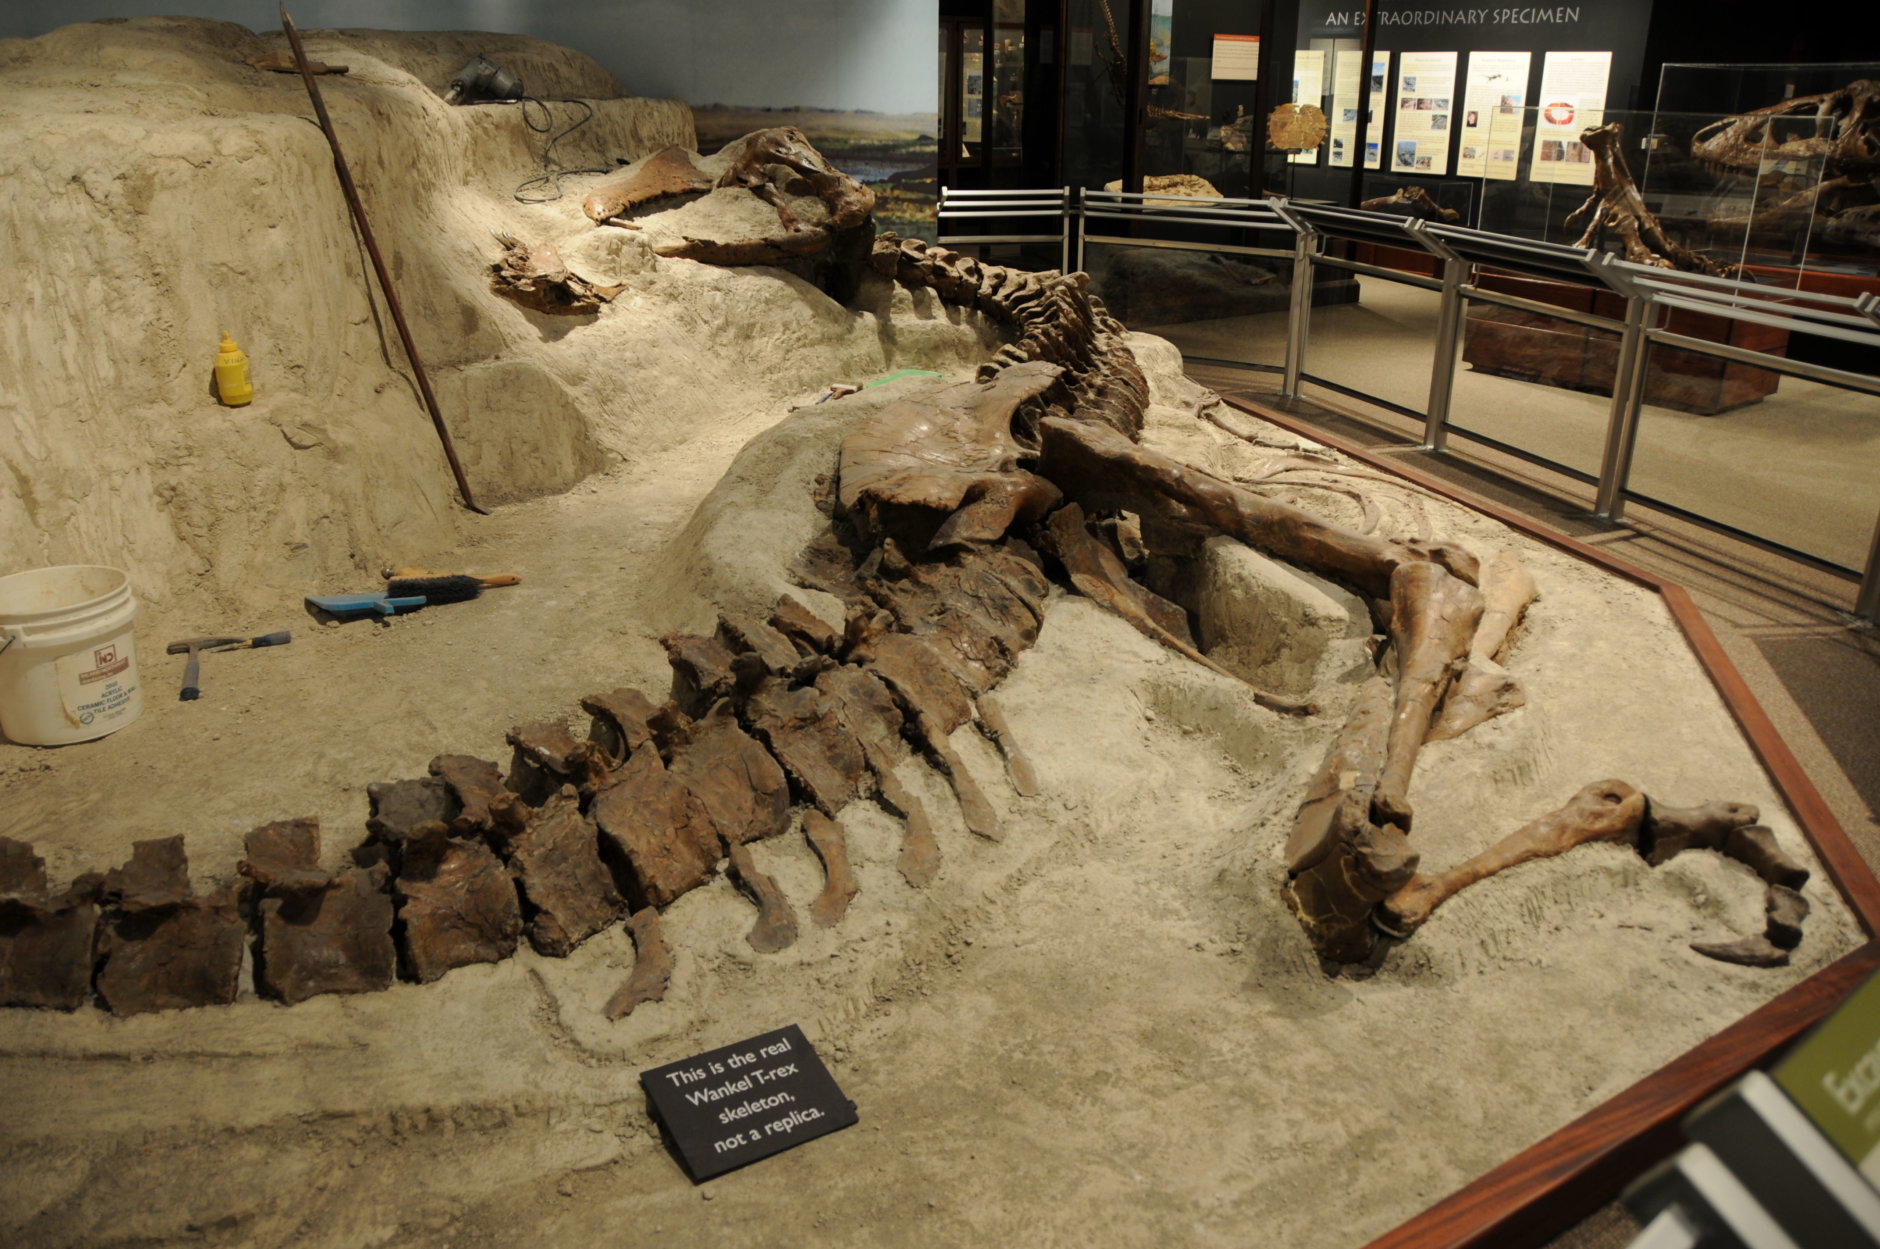 First put on display at the Montana State University’s Museum of the Rockies in 2005 in Bozeman, Montana, the Wankel T. rex was exhibited in the "death pose" from the riverbed where it died 656 million years ago. (Courtesy Museum of the Rockies)